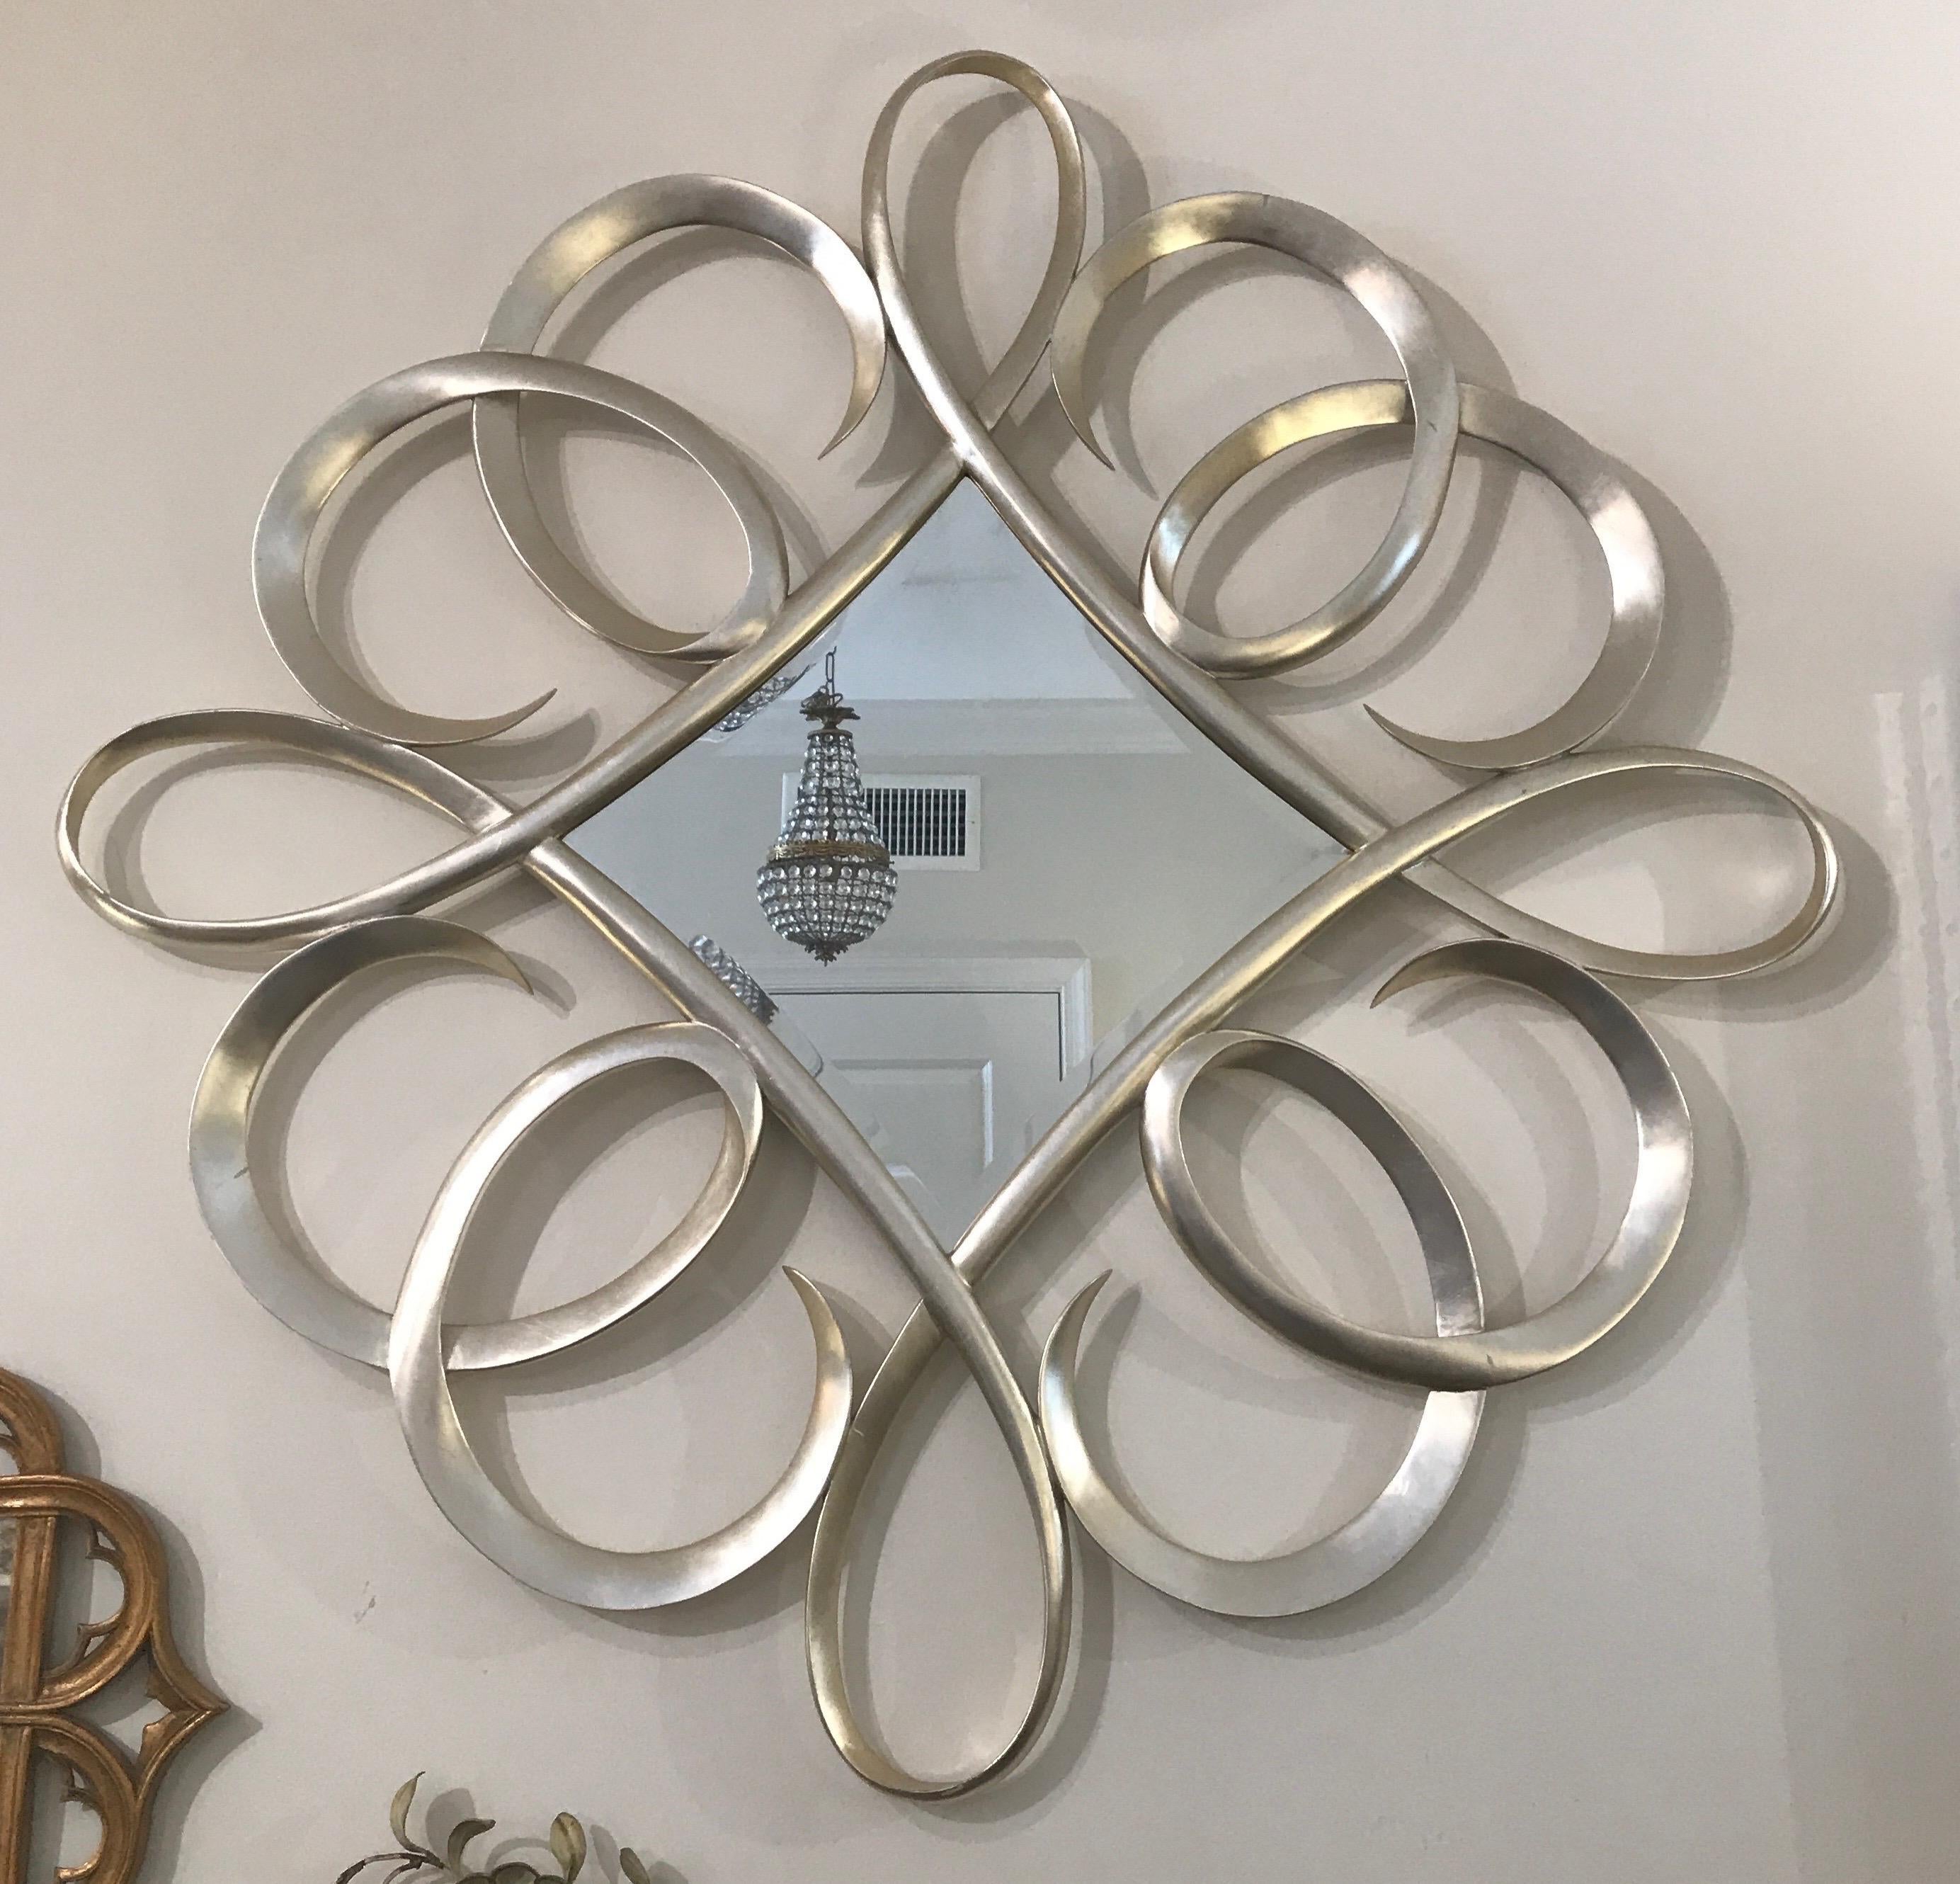 Carved & silver gilded swirled mirror by Christopher Guy.